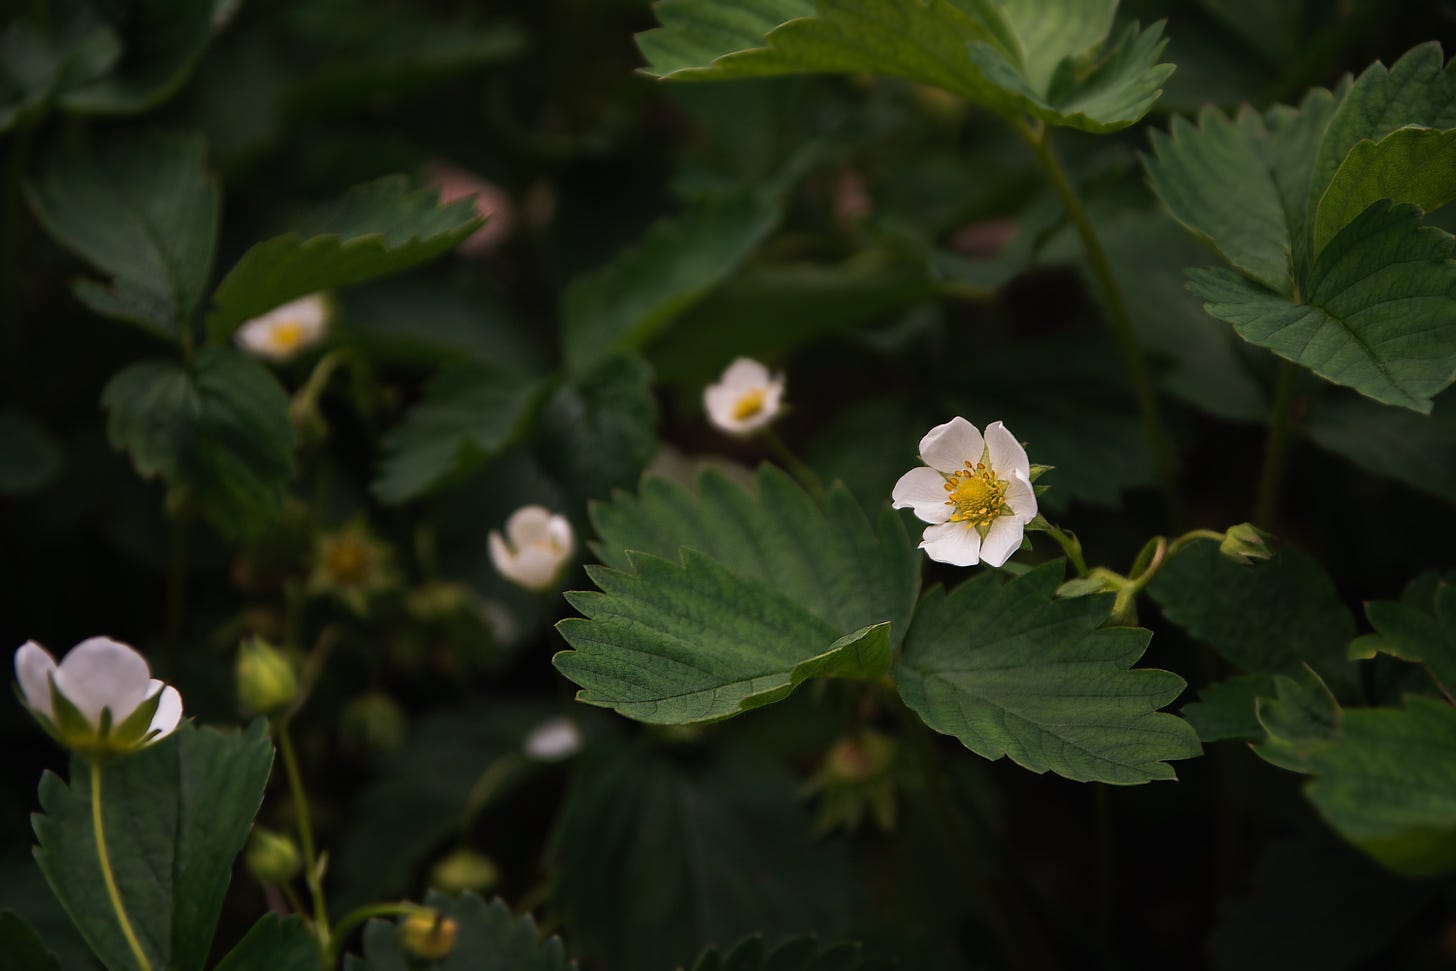 Foliage of a strawberry plant with four visible white strawberry flowers.